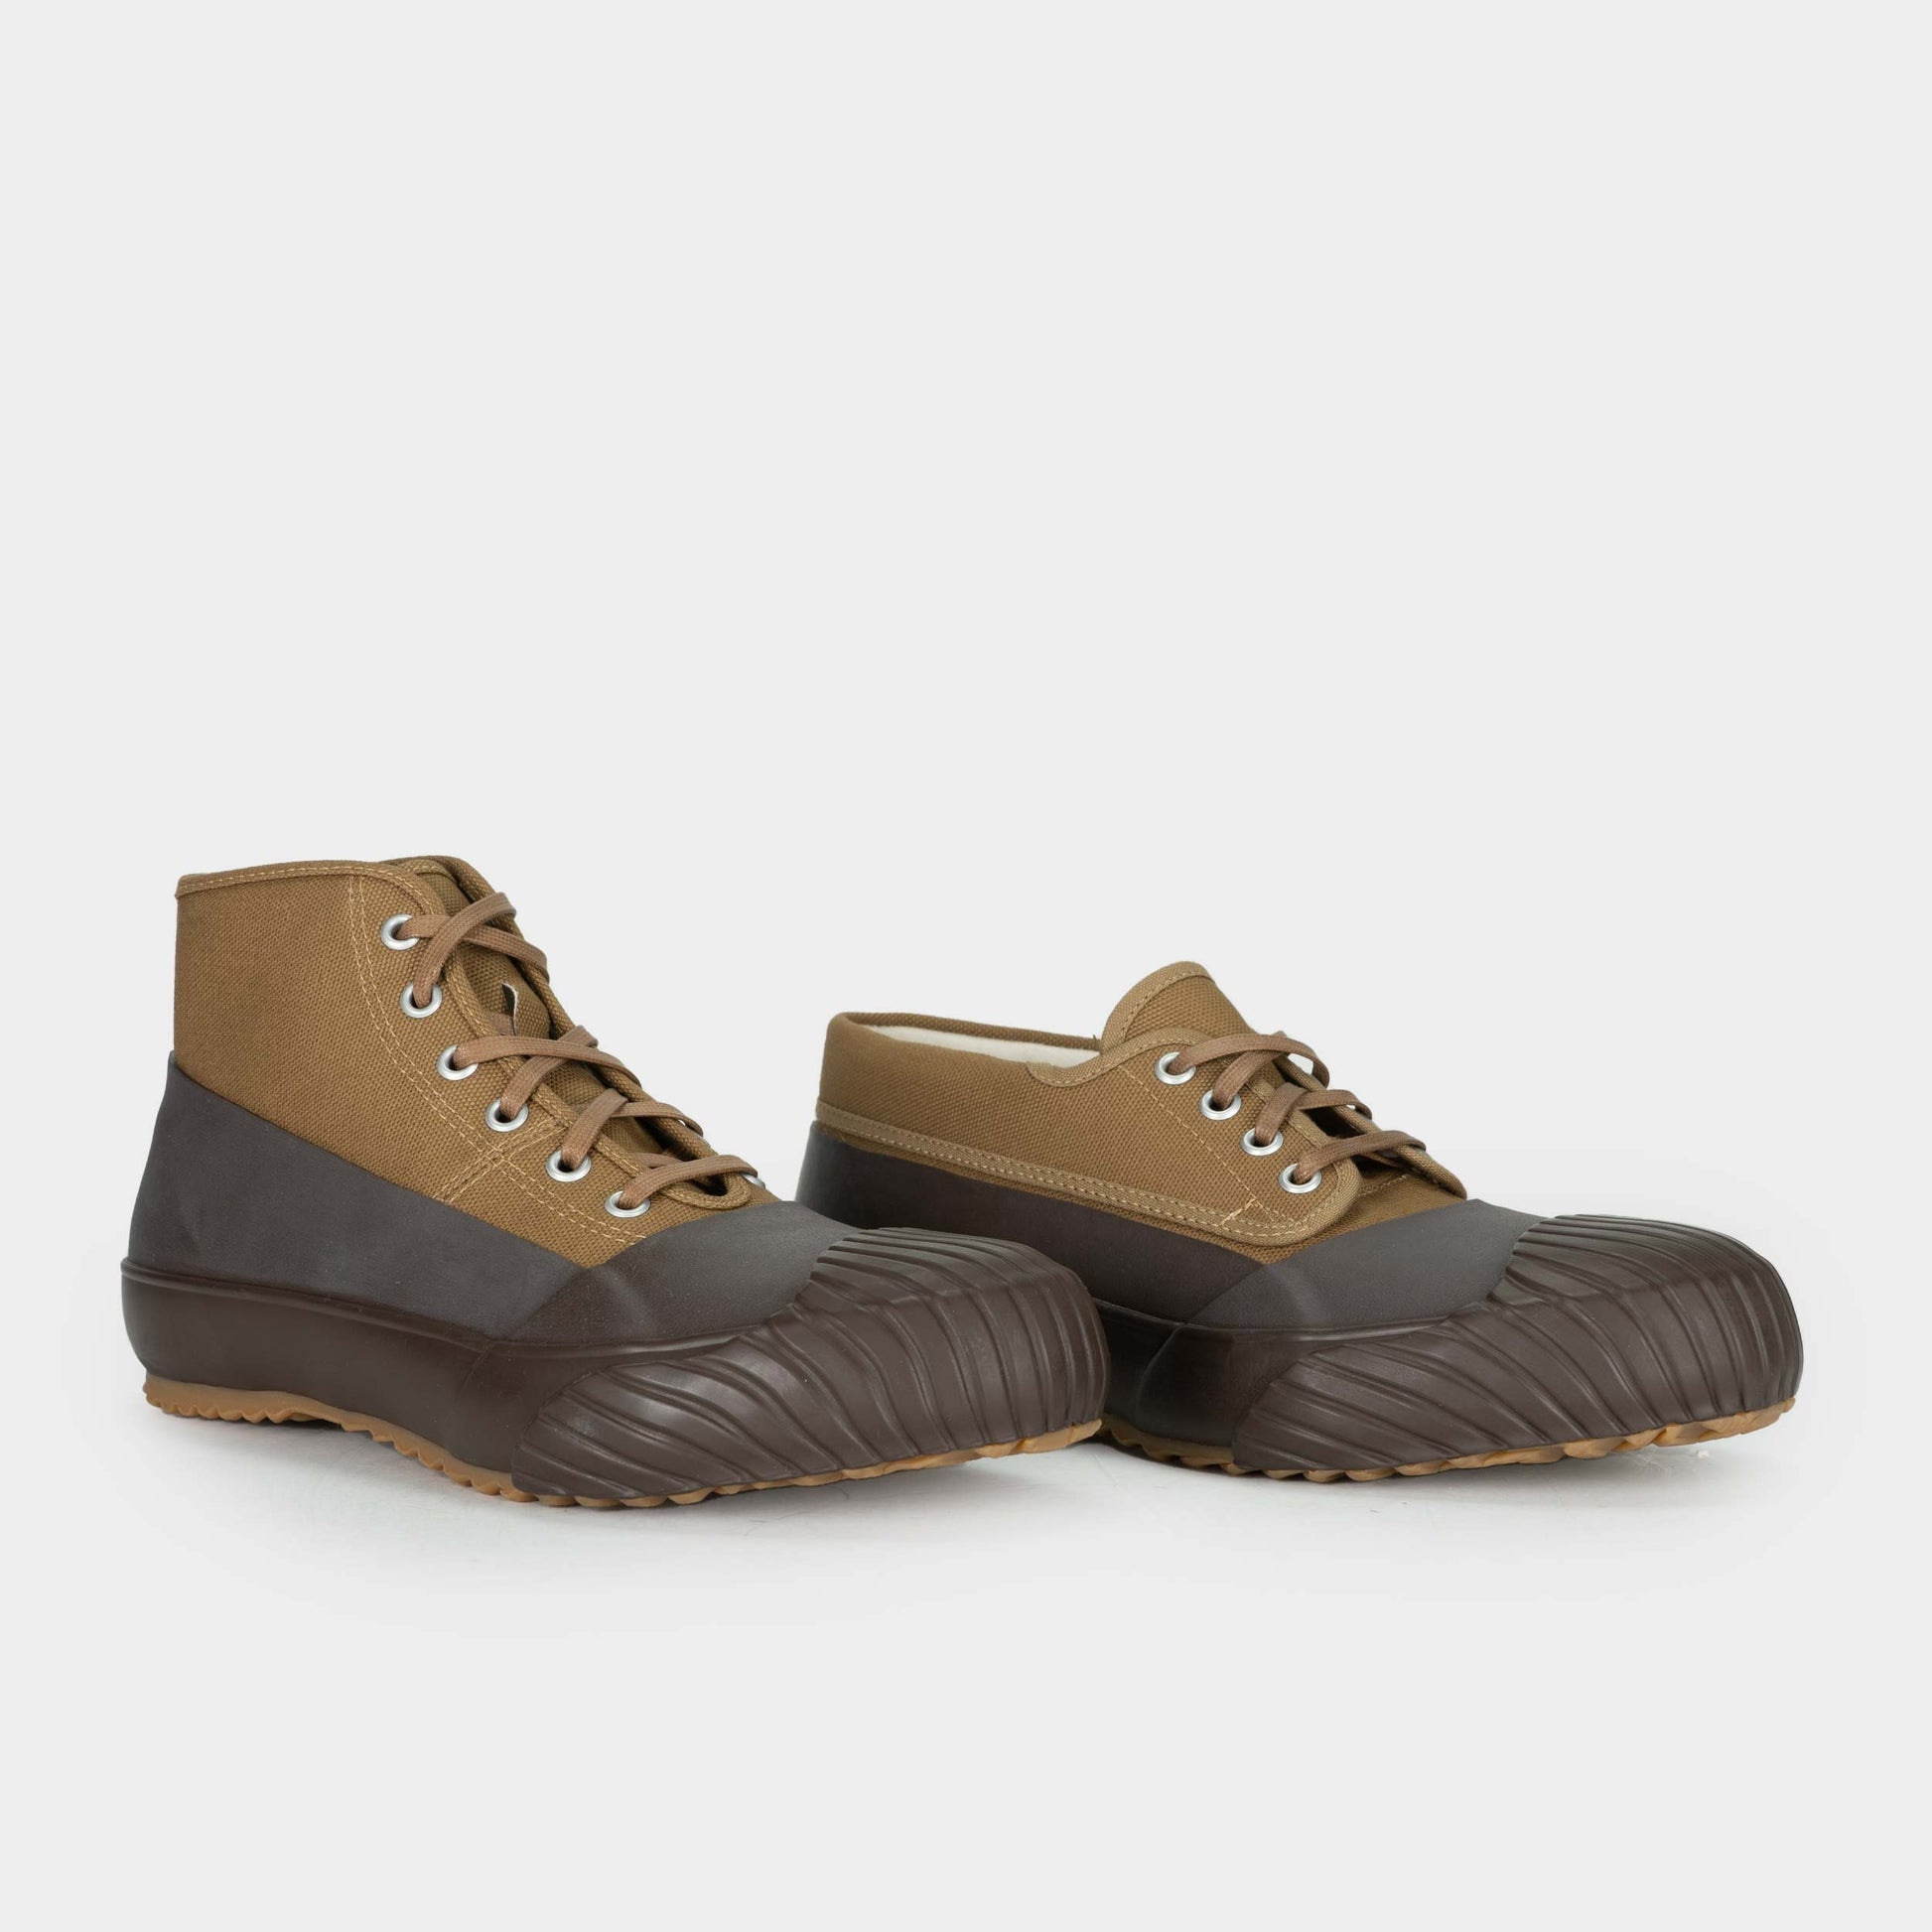 (Waitlist) Japanese All Weather High Top in Brown